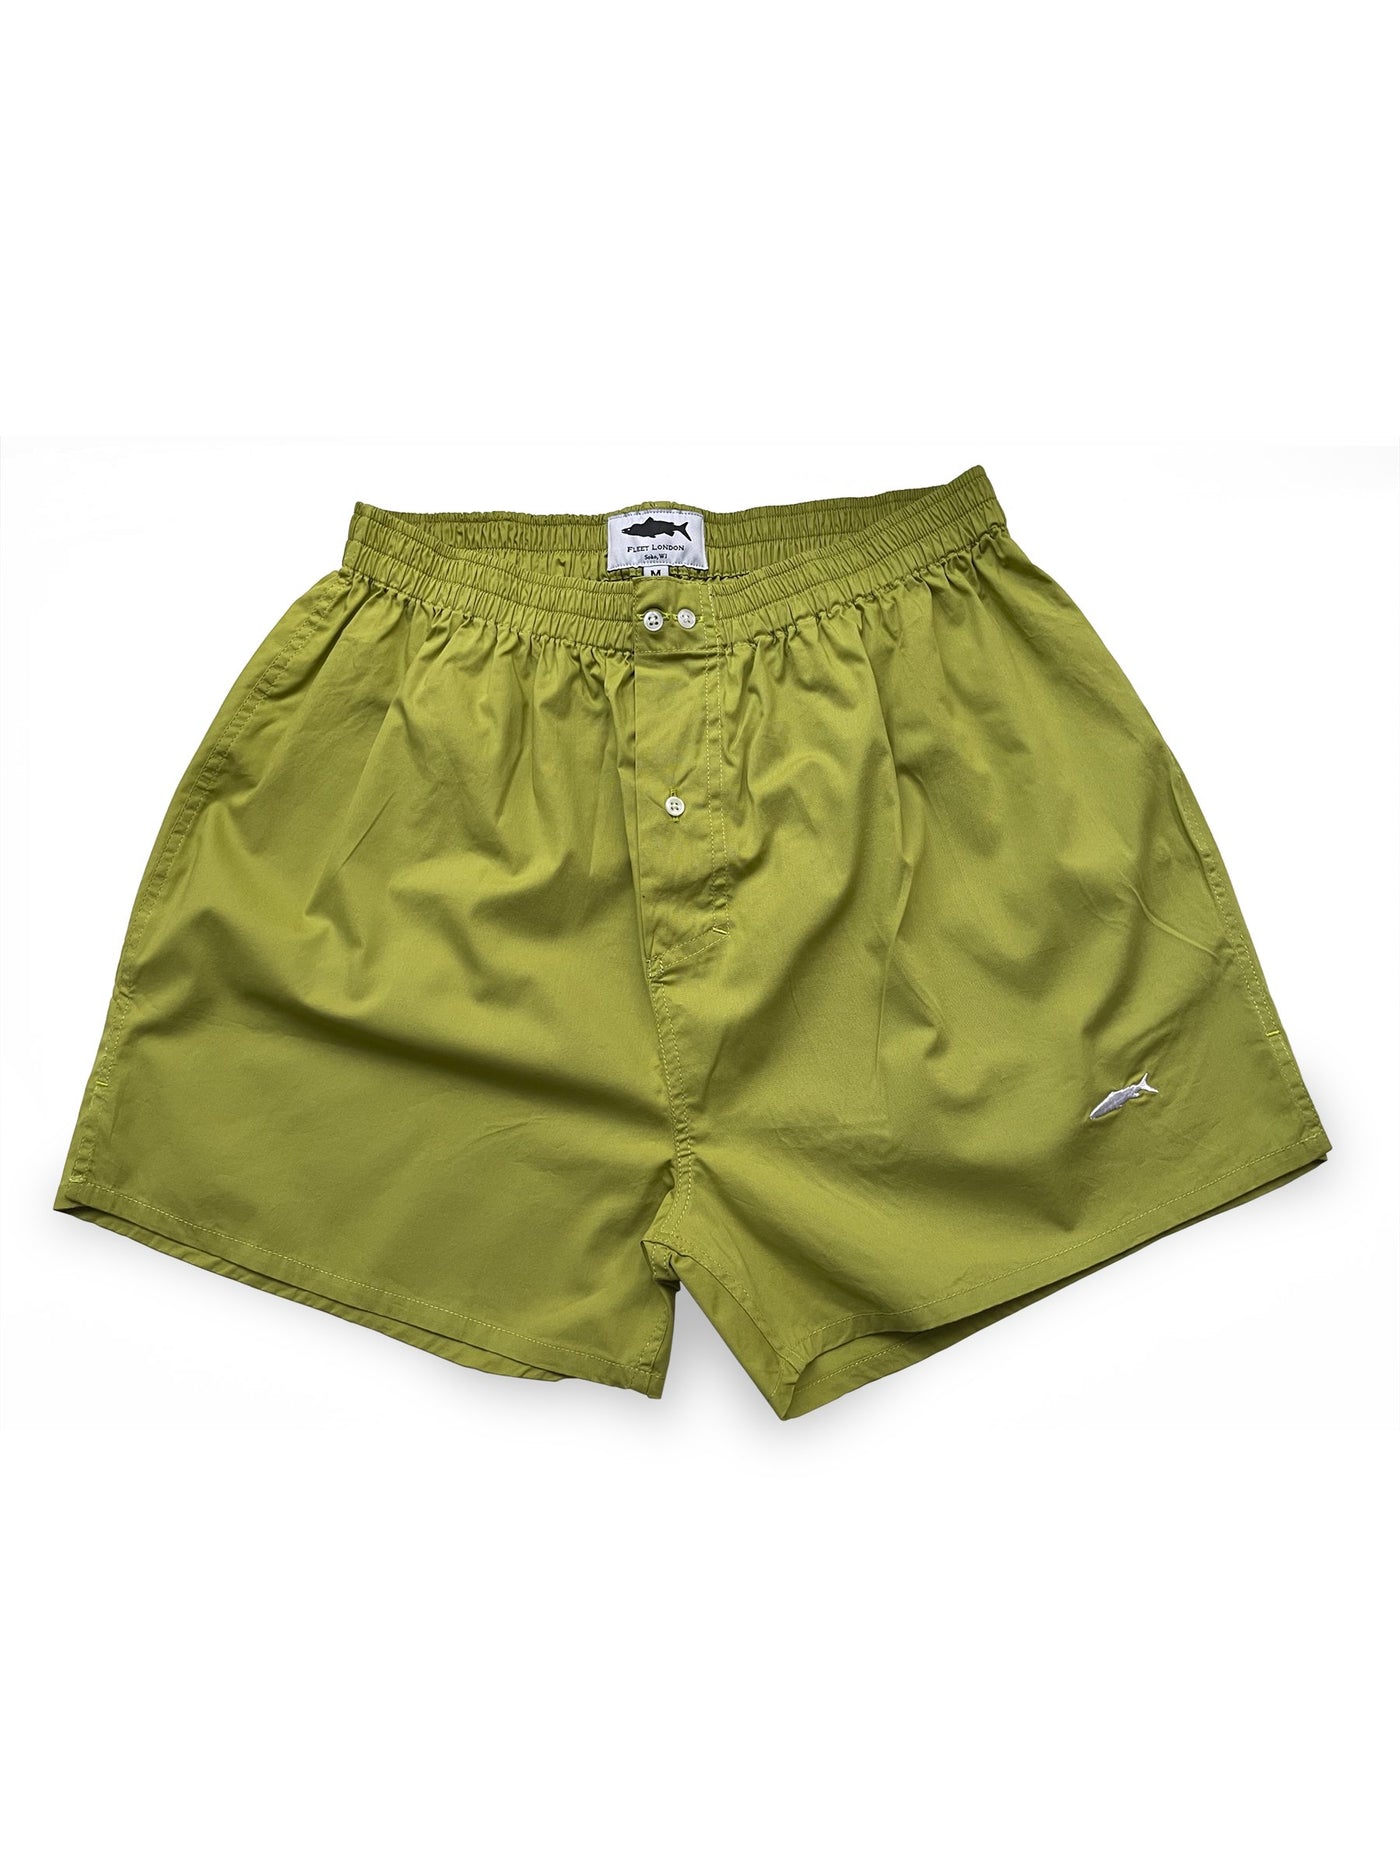 Olive Green Boxer Shorts